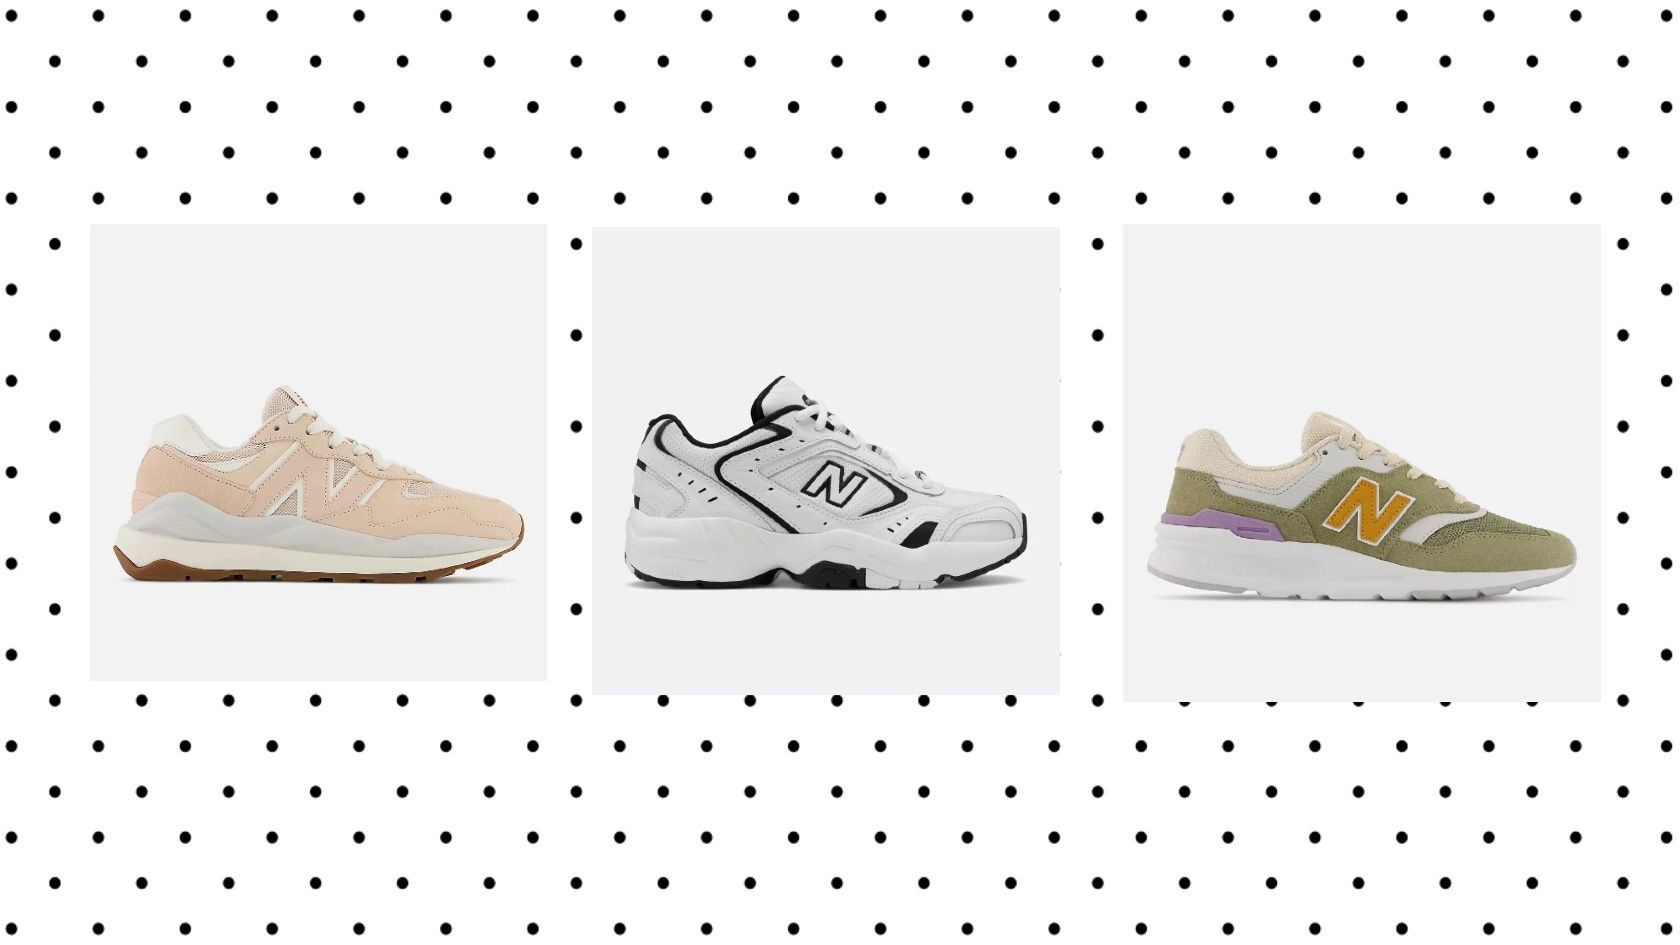 11 New Balance Trainers To Wear With Dresses This Summer